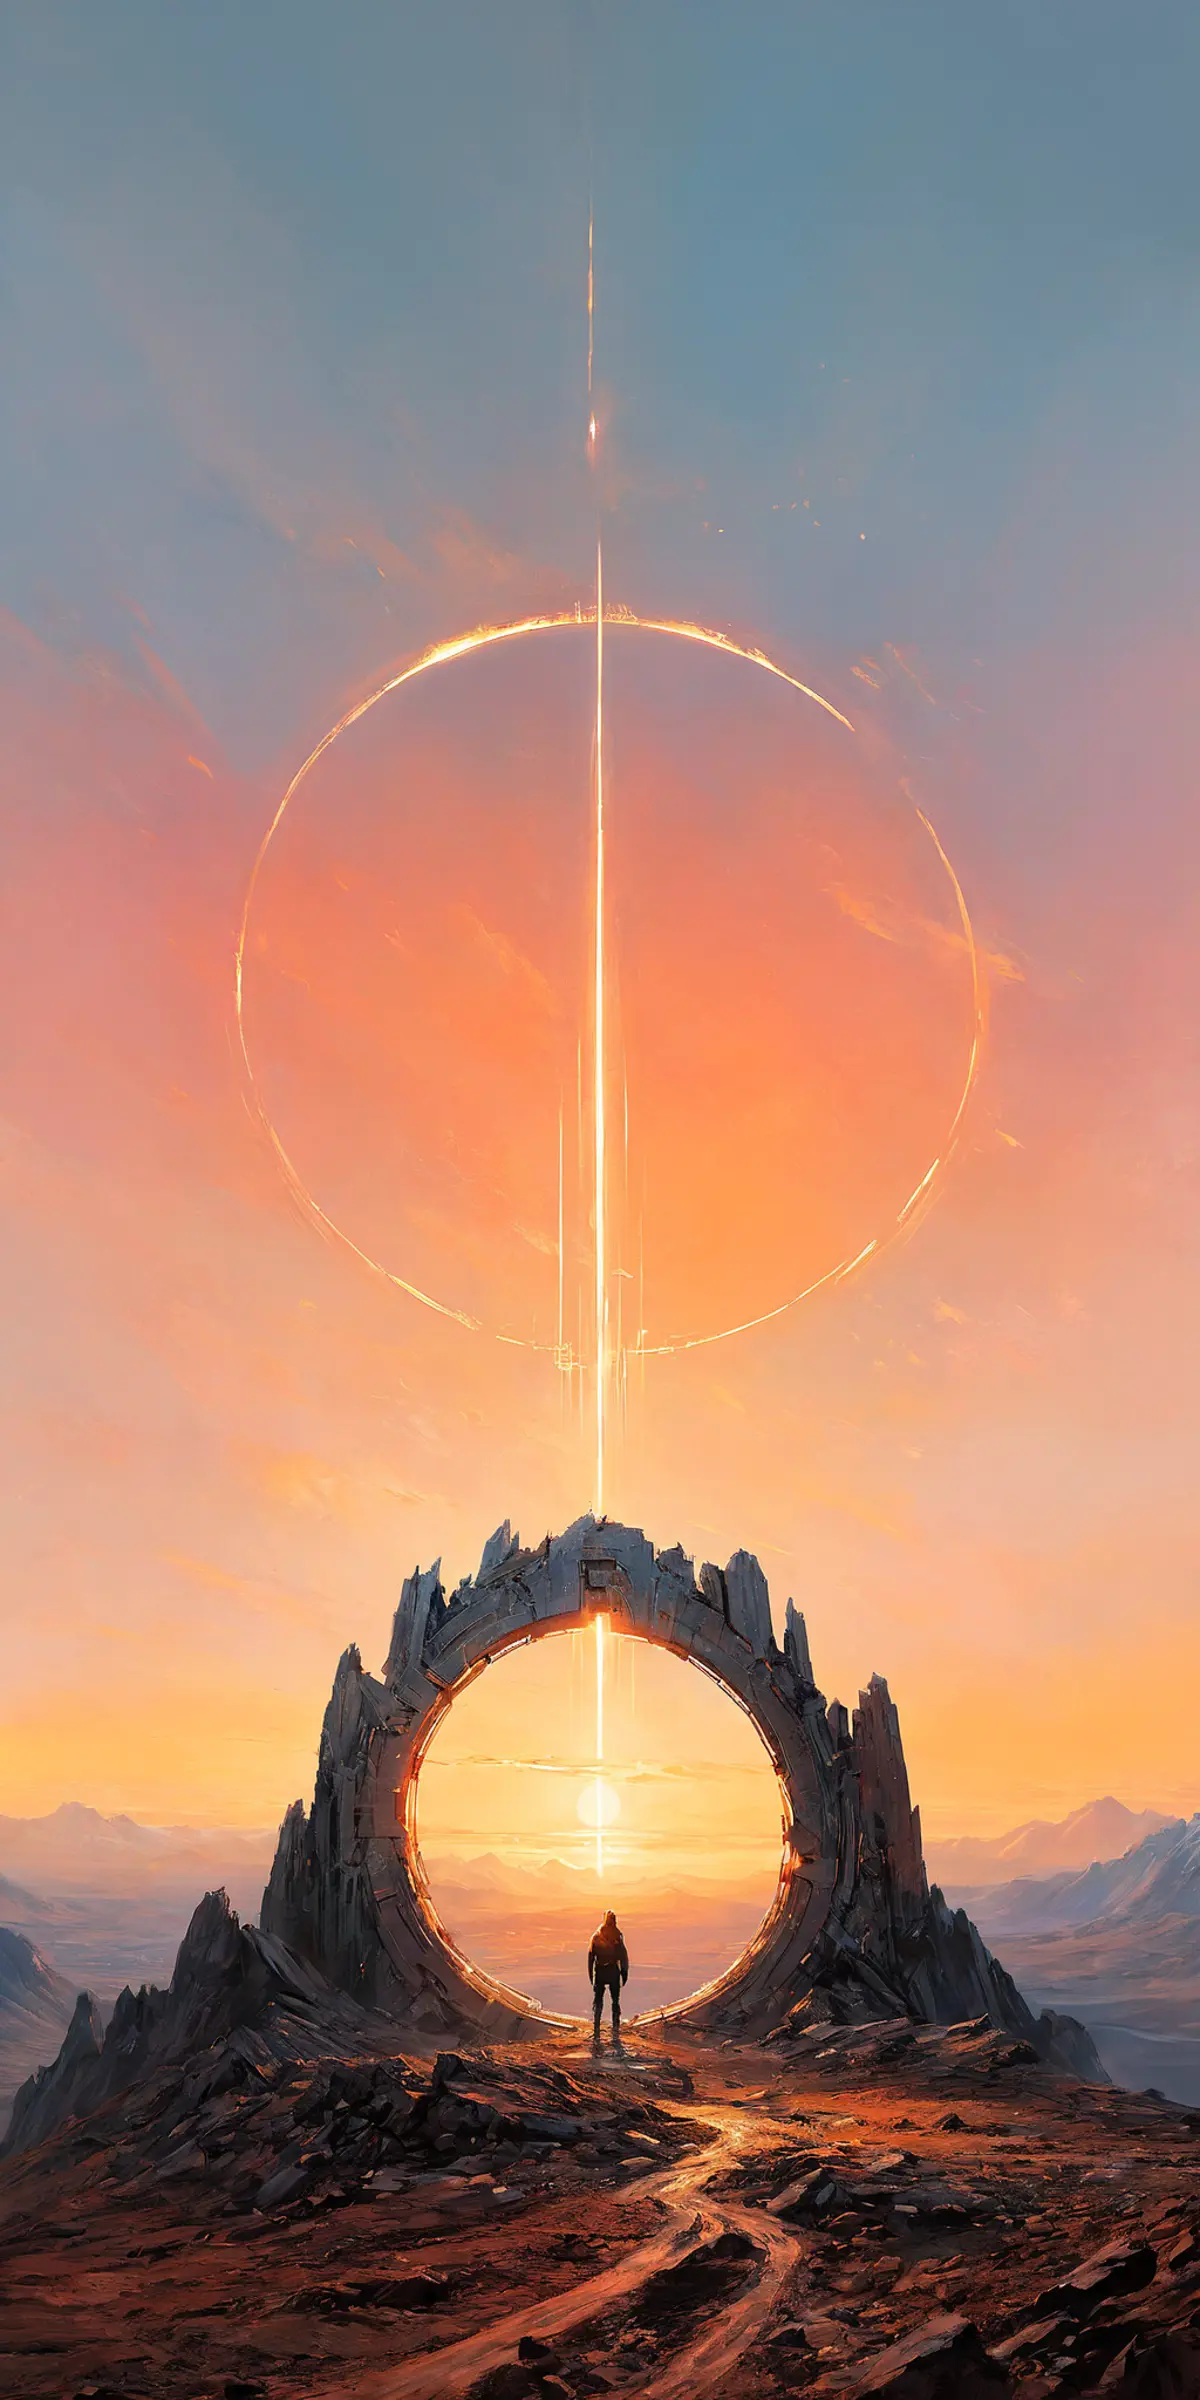 A figure stands before a sunset framed by a massive ancient archway situated on rocky, mountainous terrain. A path through the rusty earth leading up to the portal winds between the rugged rocks in the foreground. Above the archway, a faint circle of light intersects dramatically with a vertical beam that pierces the sky. 